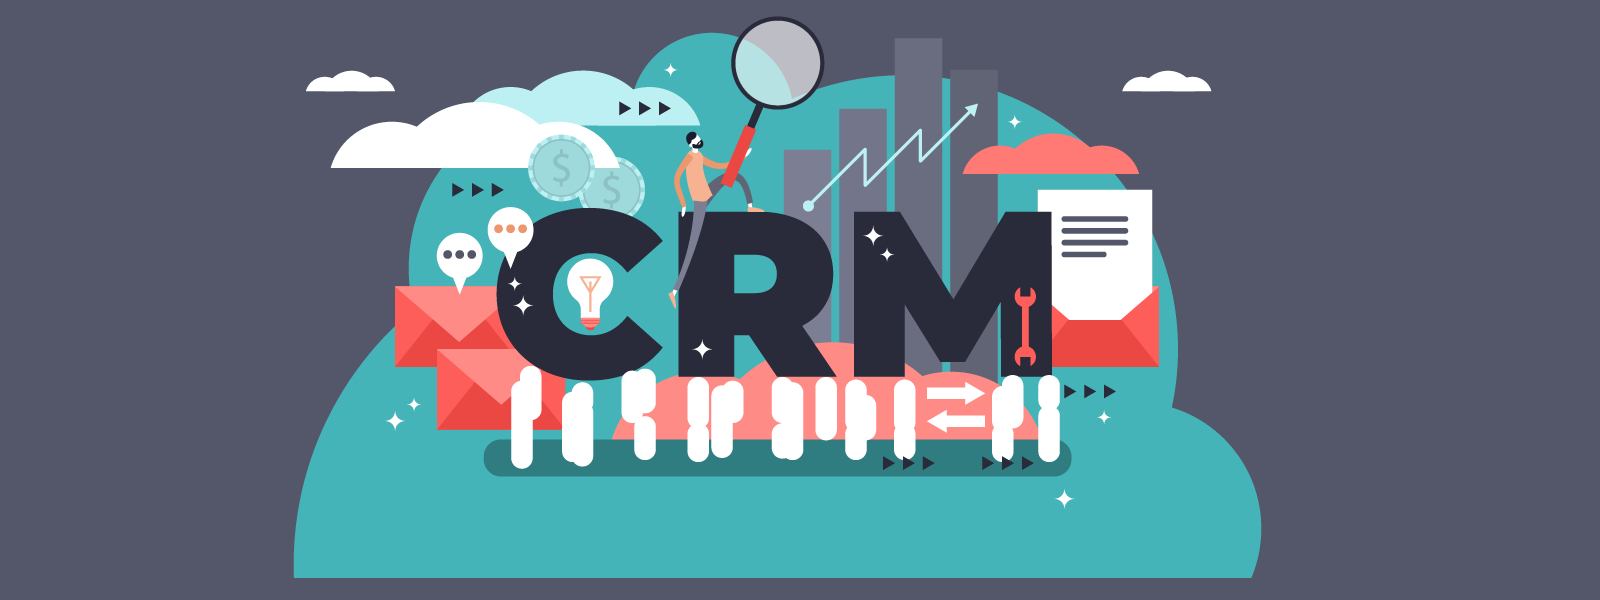 Portable CRM becomes a reality